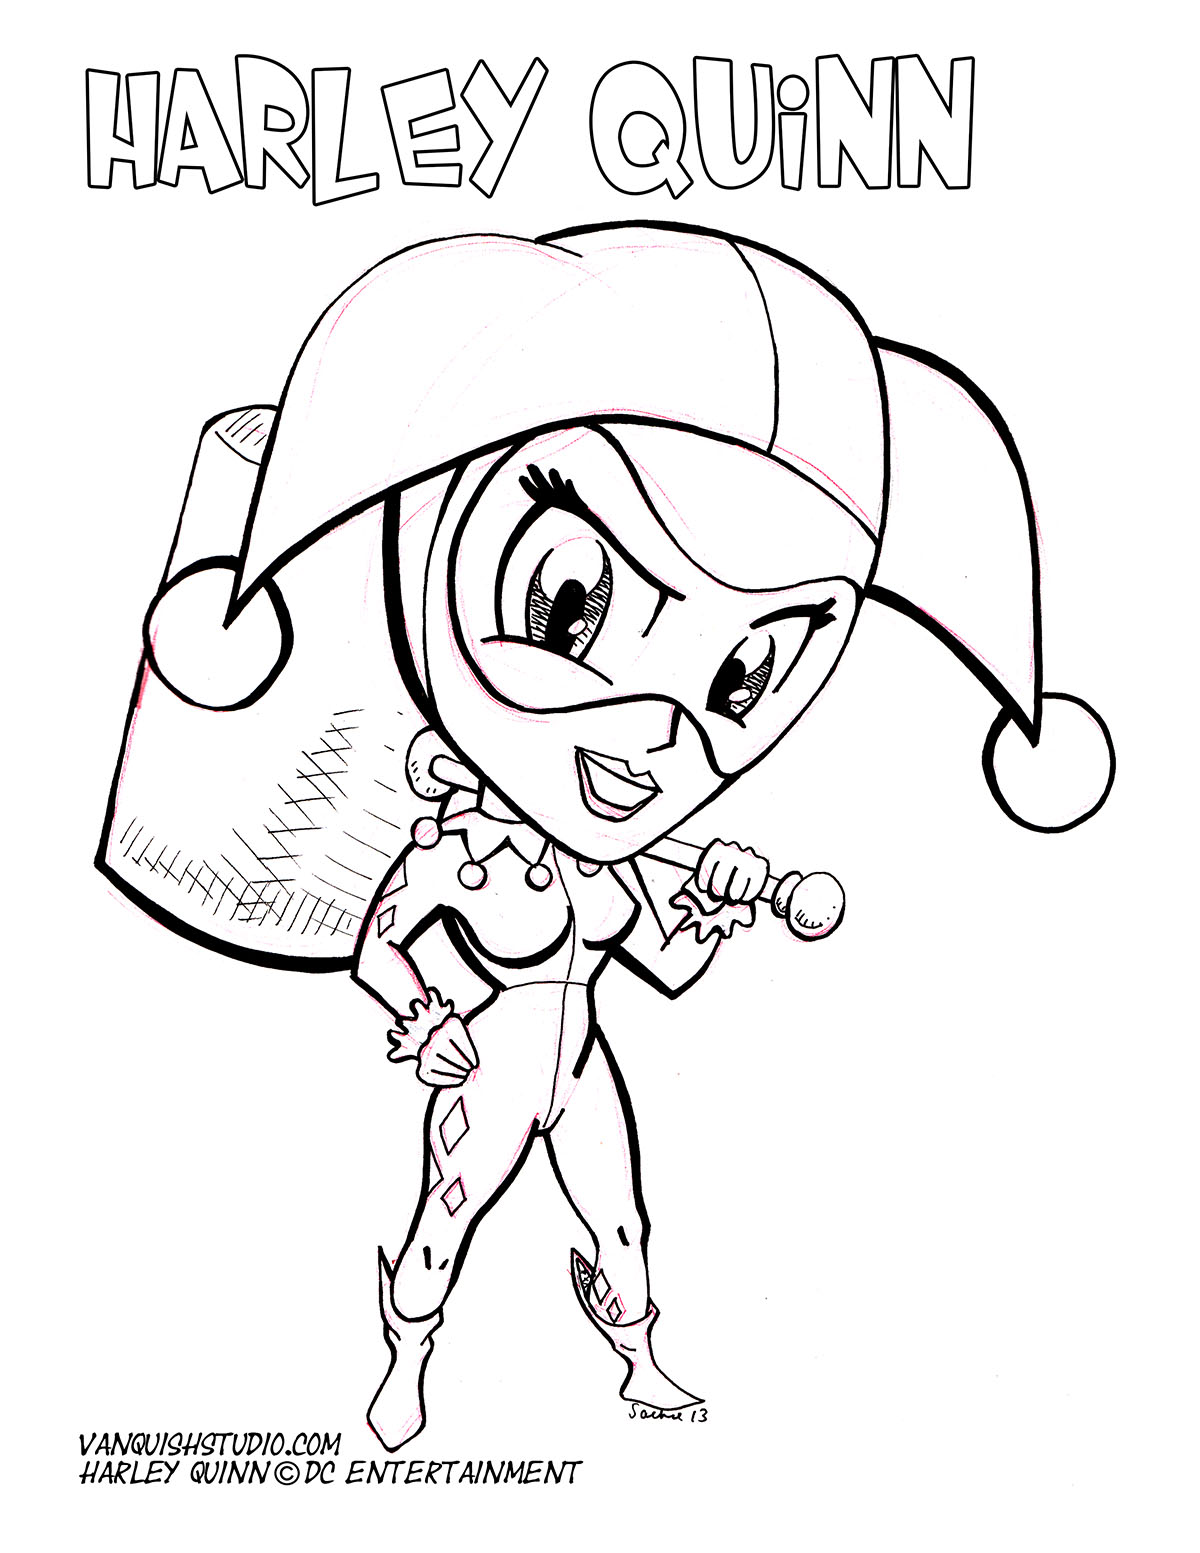 Coloring Pages  Harley Quinn Coloring Page Vanquish Studio ...